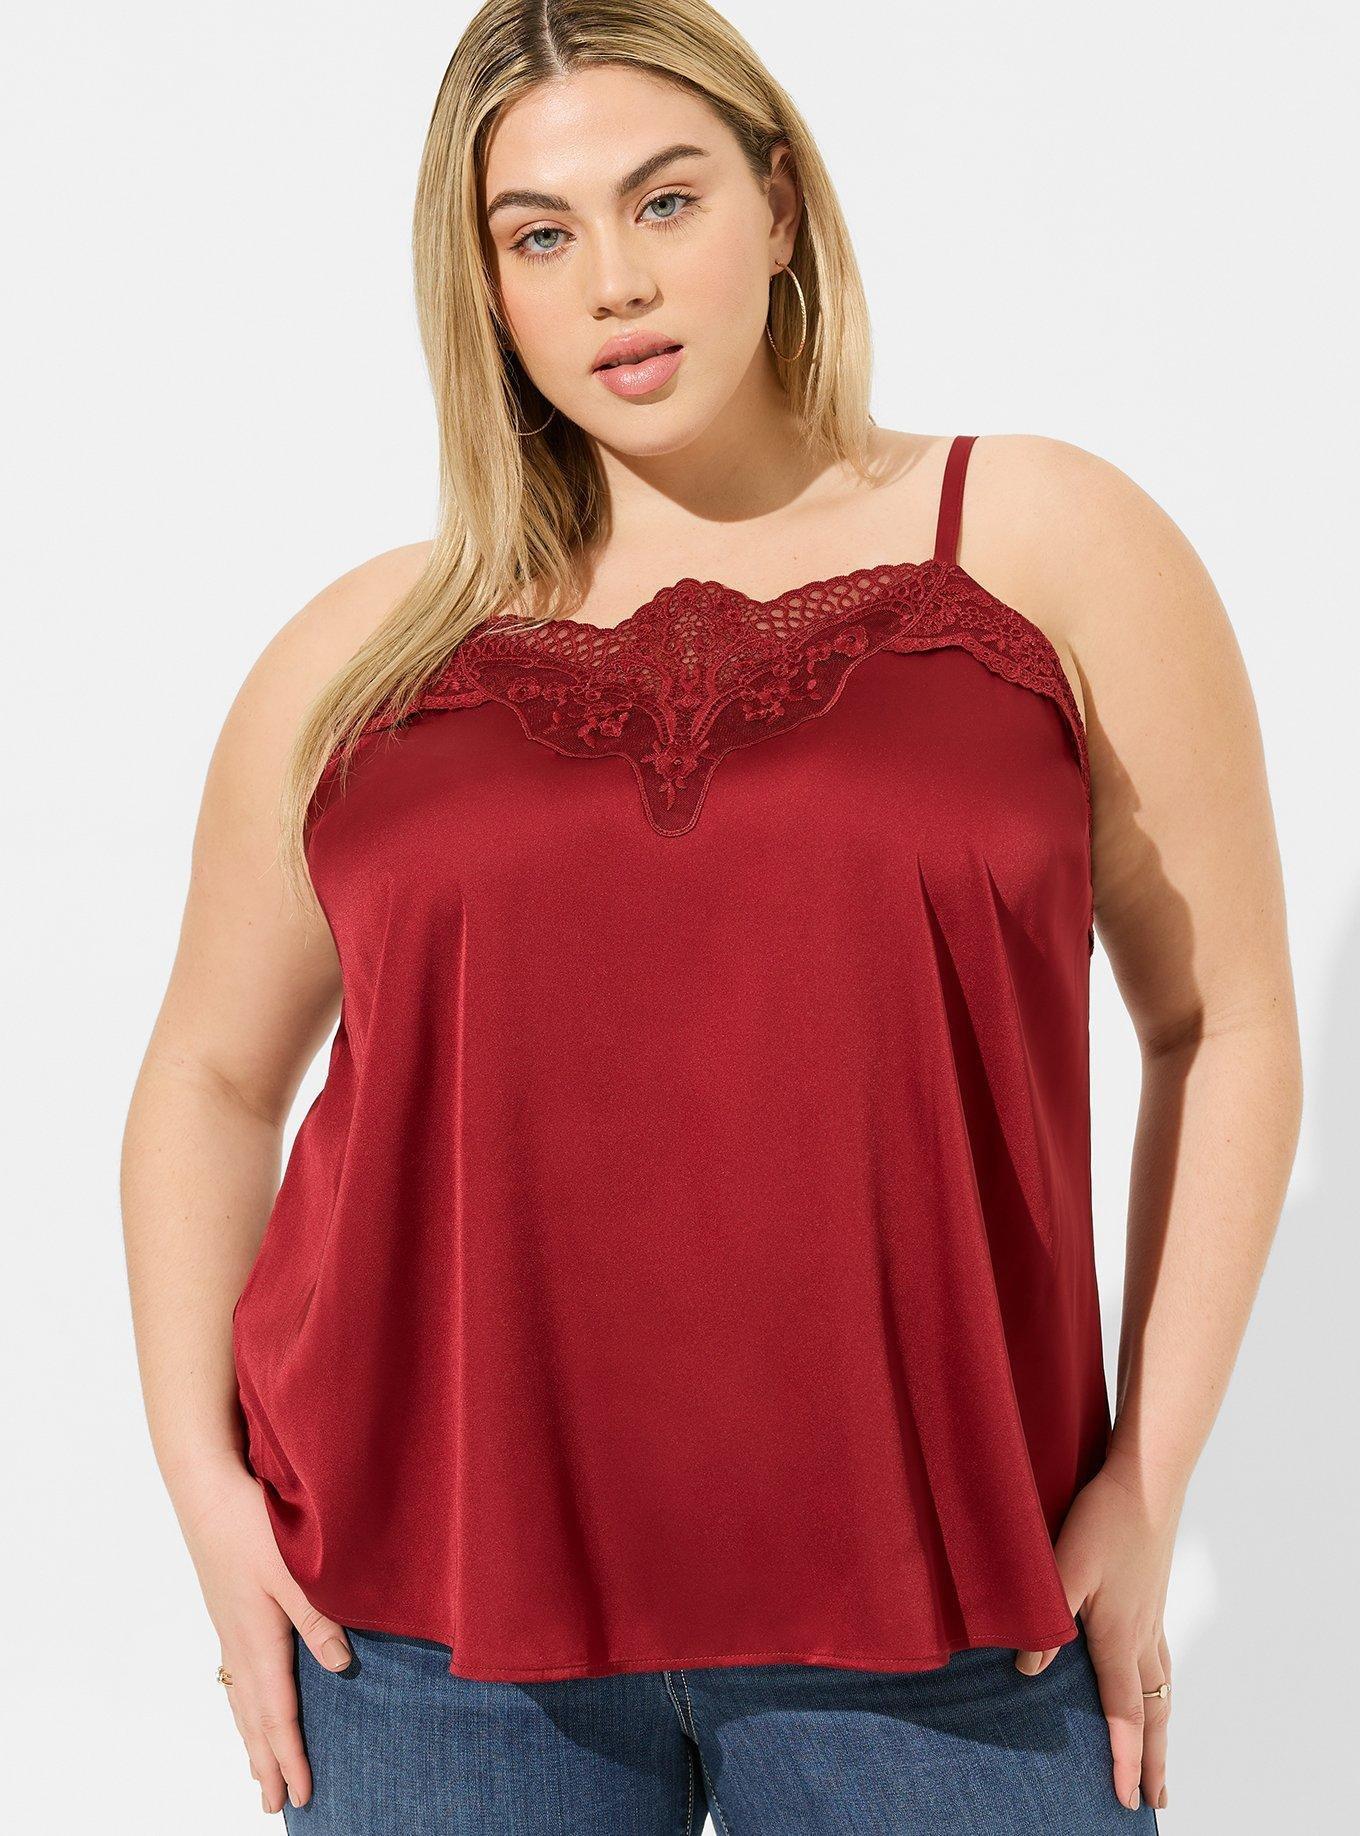 Womens Plus Size Camisole Tops Built in Bra Cup Swing Lace Flowy Vest  Sleeveless